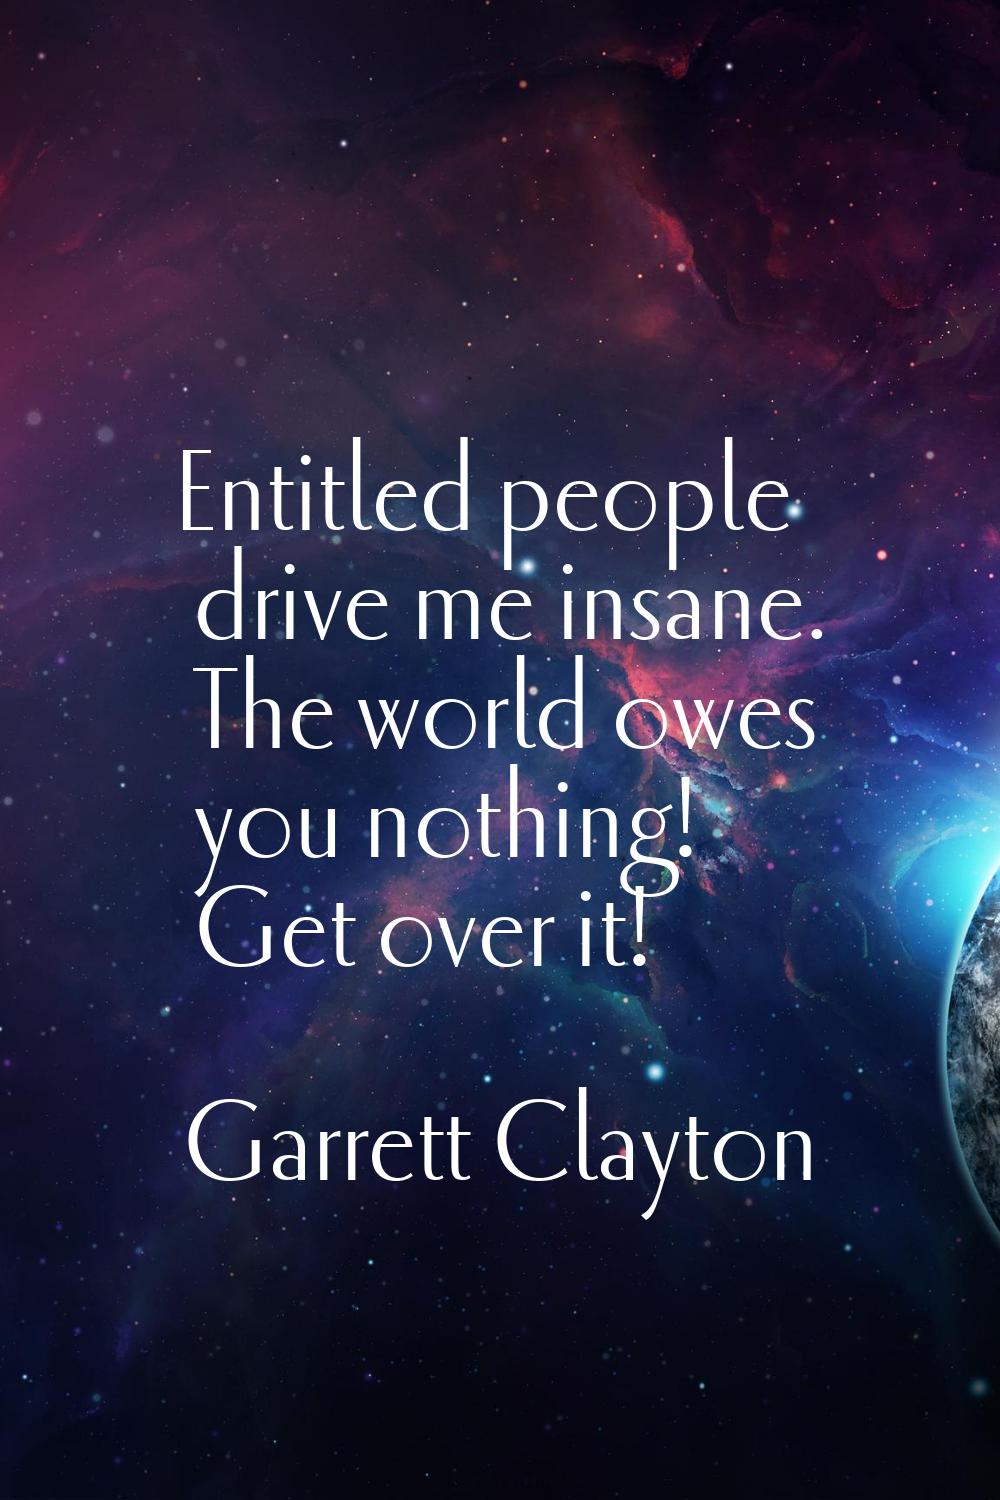 Entitled people drive me insane. The world owes you nothing! Get over it!